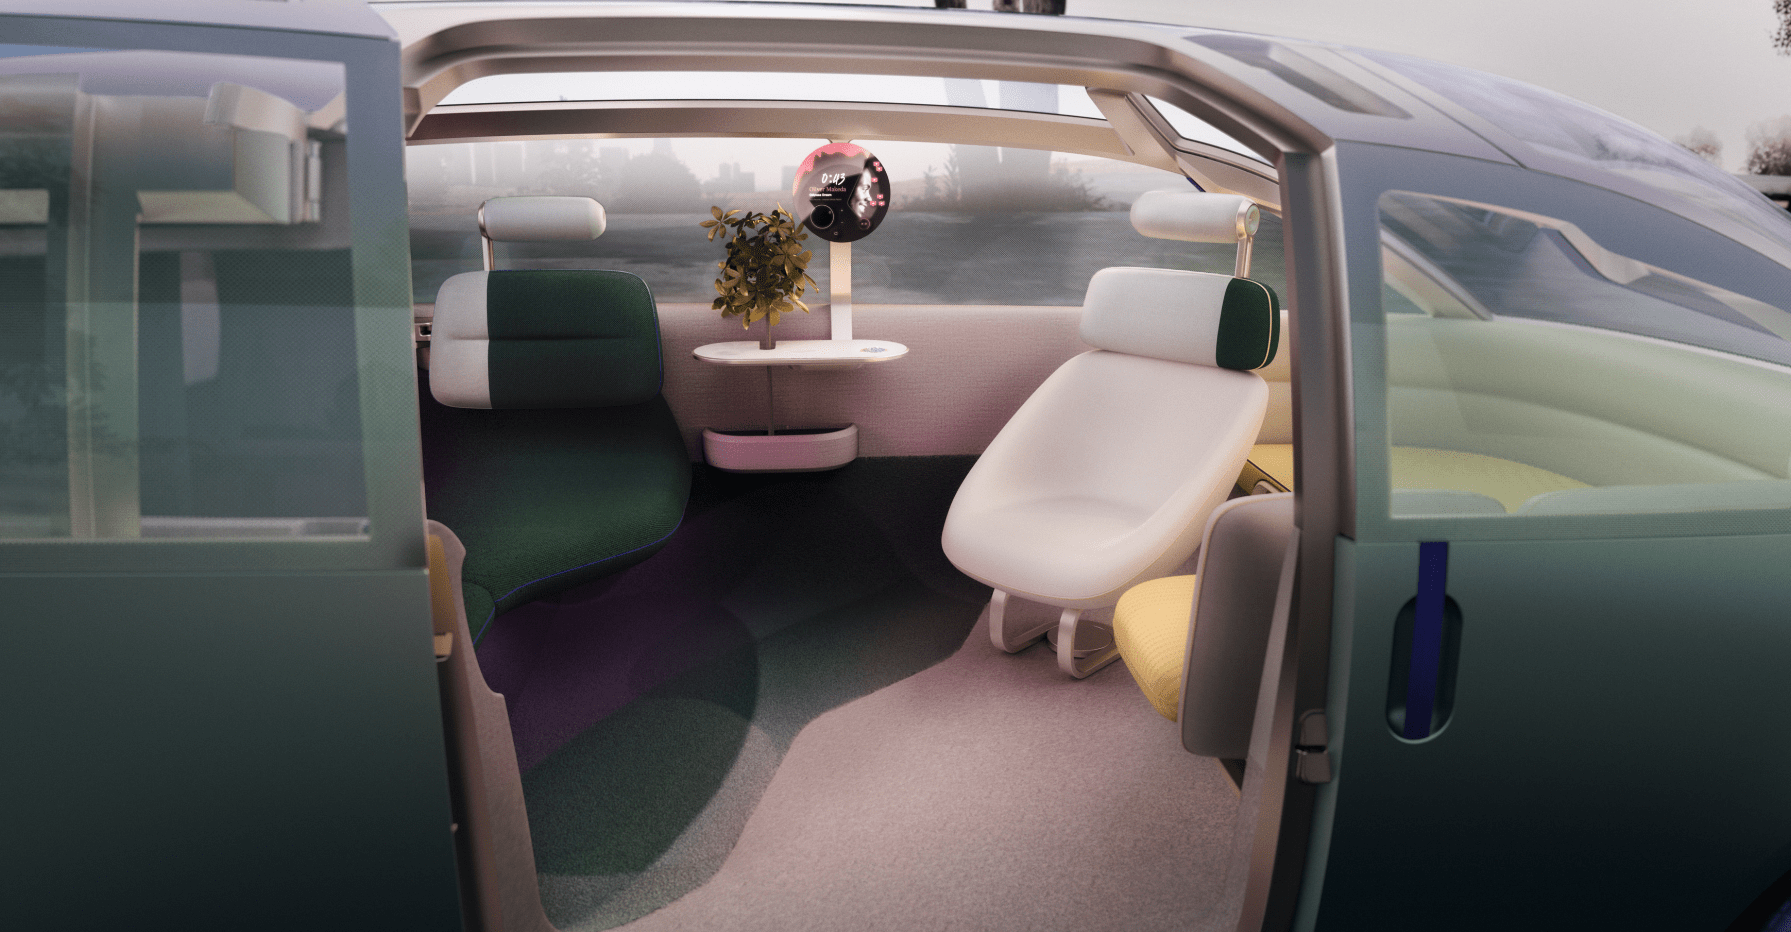 Mini’s Urbanaut Concept Is A Room On Wheels That We’ve Seen Before And We’ll See Again